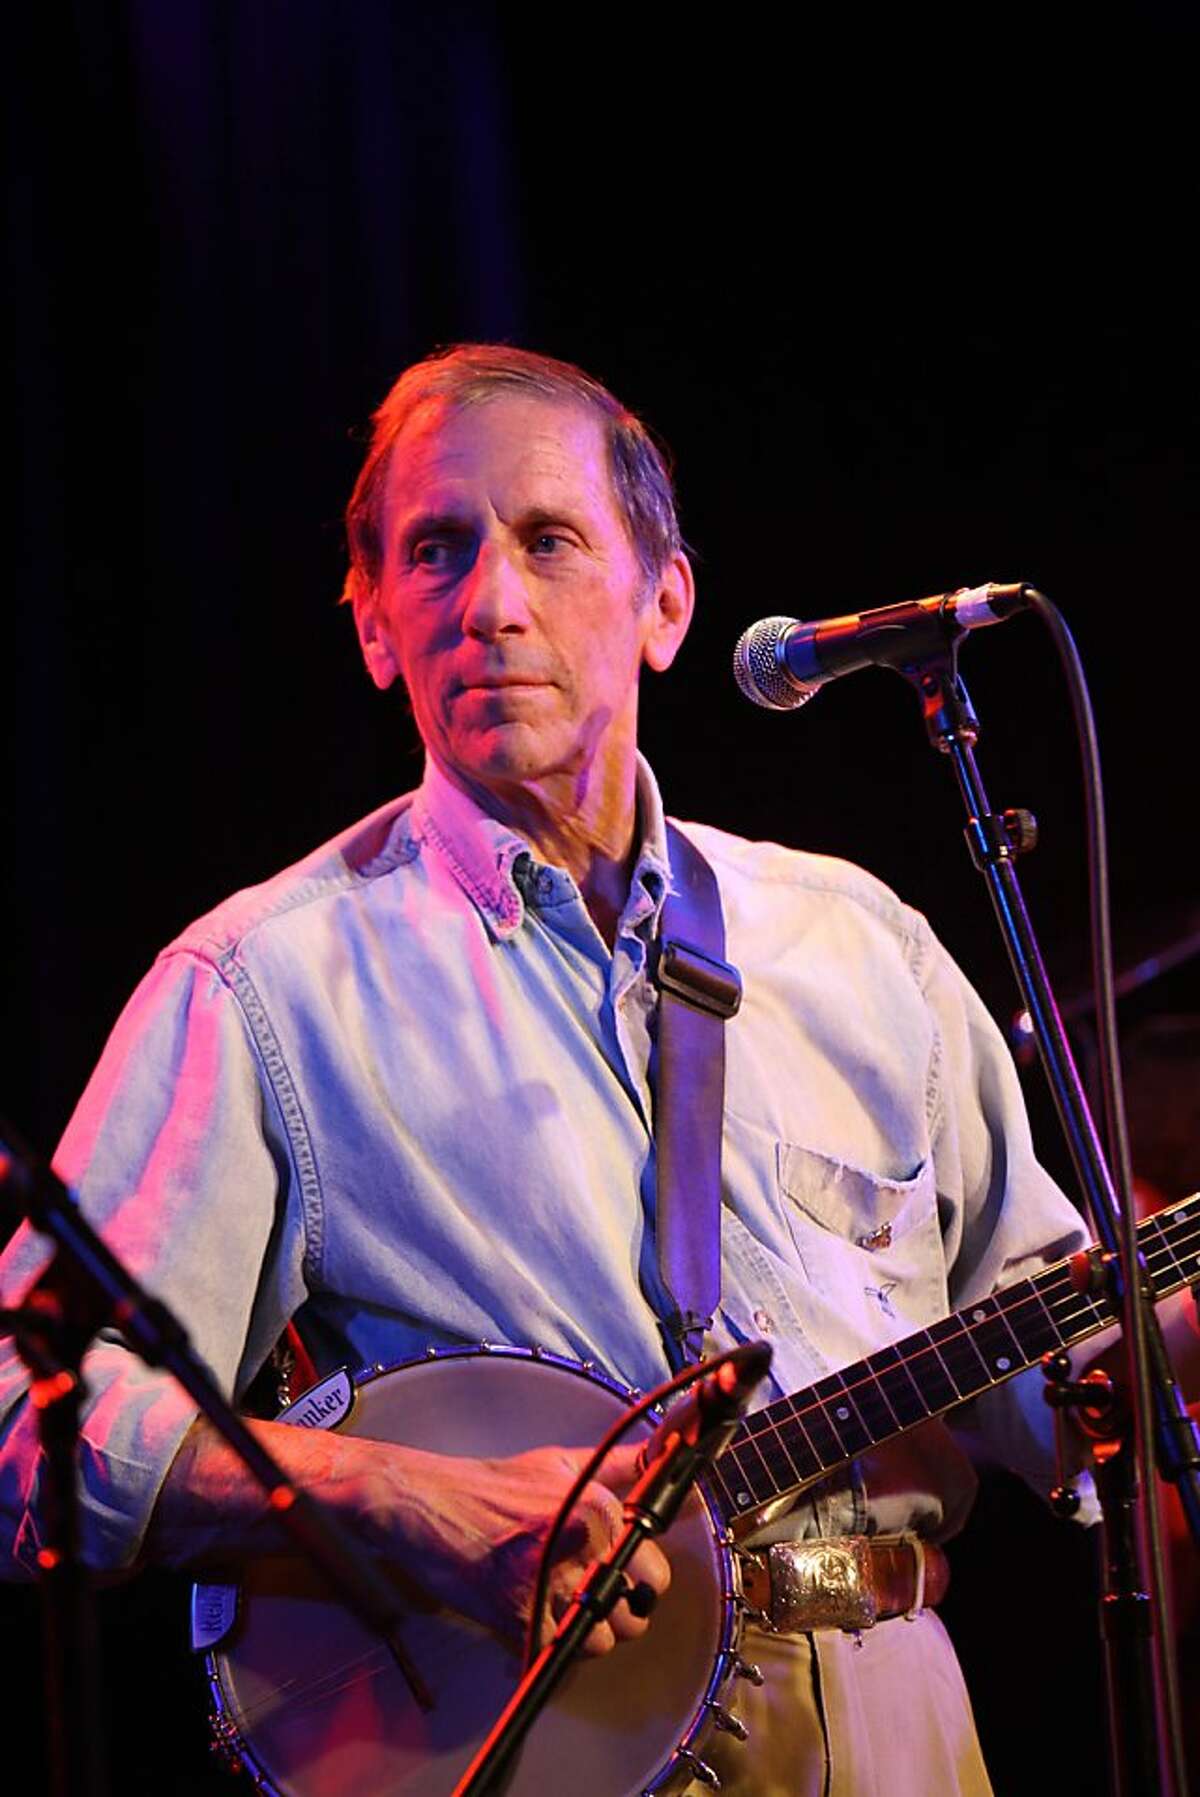 Warren Hellman, one of Slims partners, performs with the Wronglers during the gathering at a private party held to celebrate the 20th anniversary of Slims on Tuesday, October 14, 2008 in San Francisco, Calif.